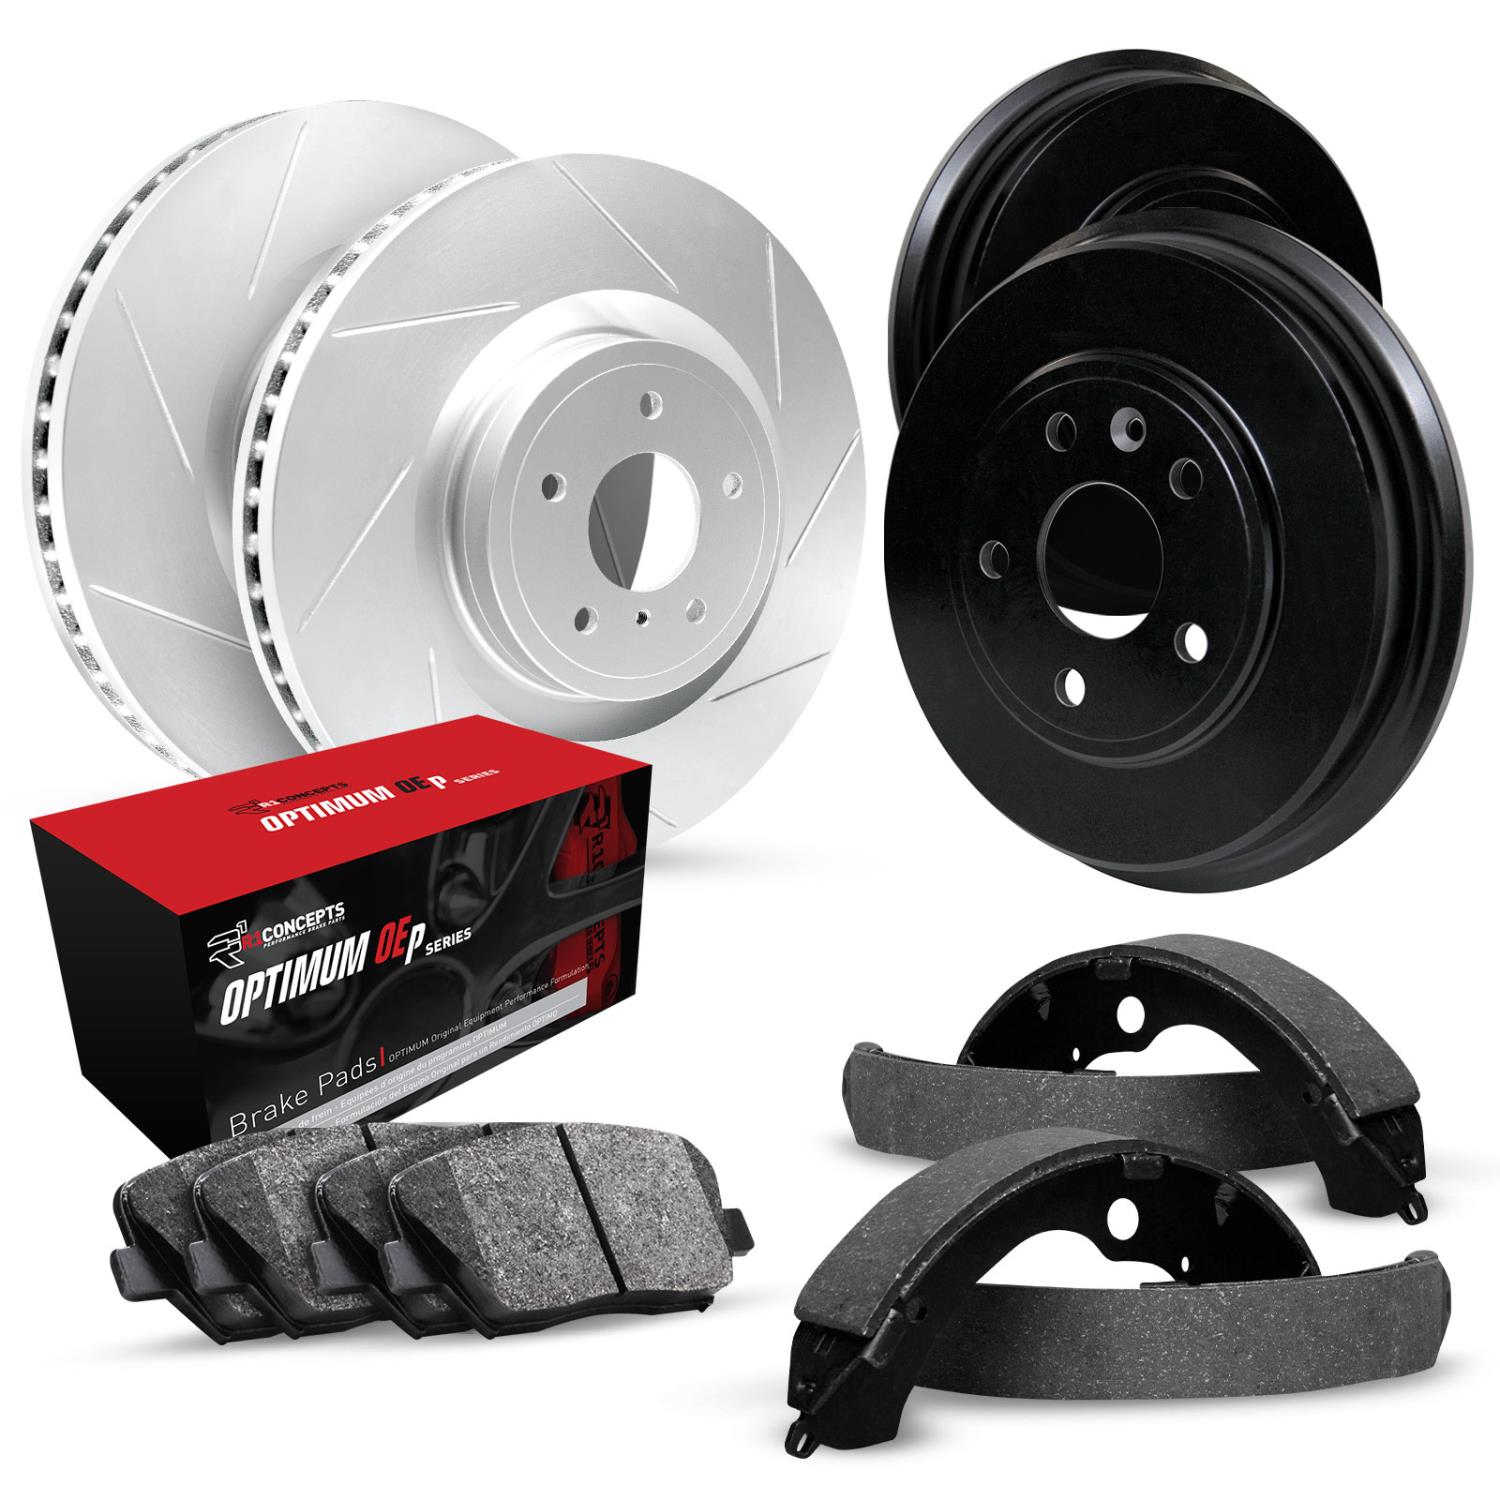 GEO-Carbon Slotted Brake Rotor & Drum Set w/Optimum OE Pads & Shoes, 1994-1997 GM, Position: Front & Rear